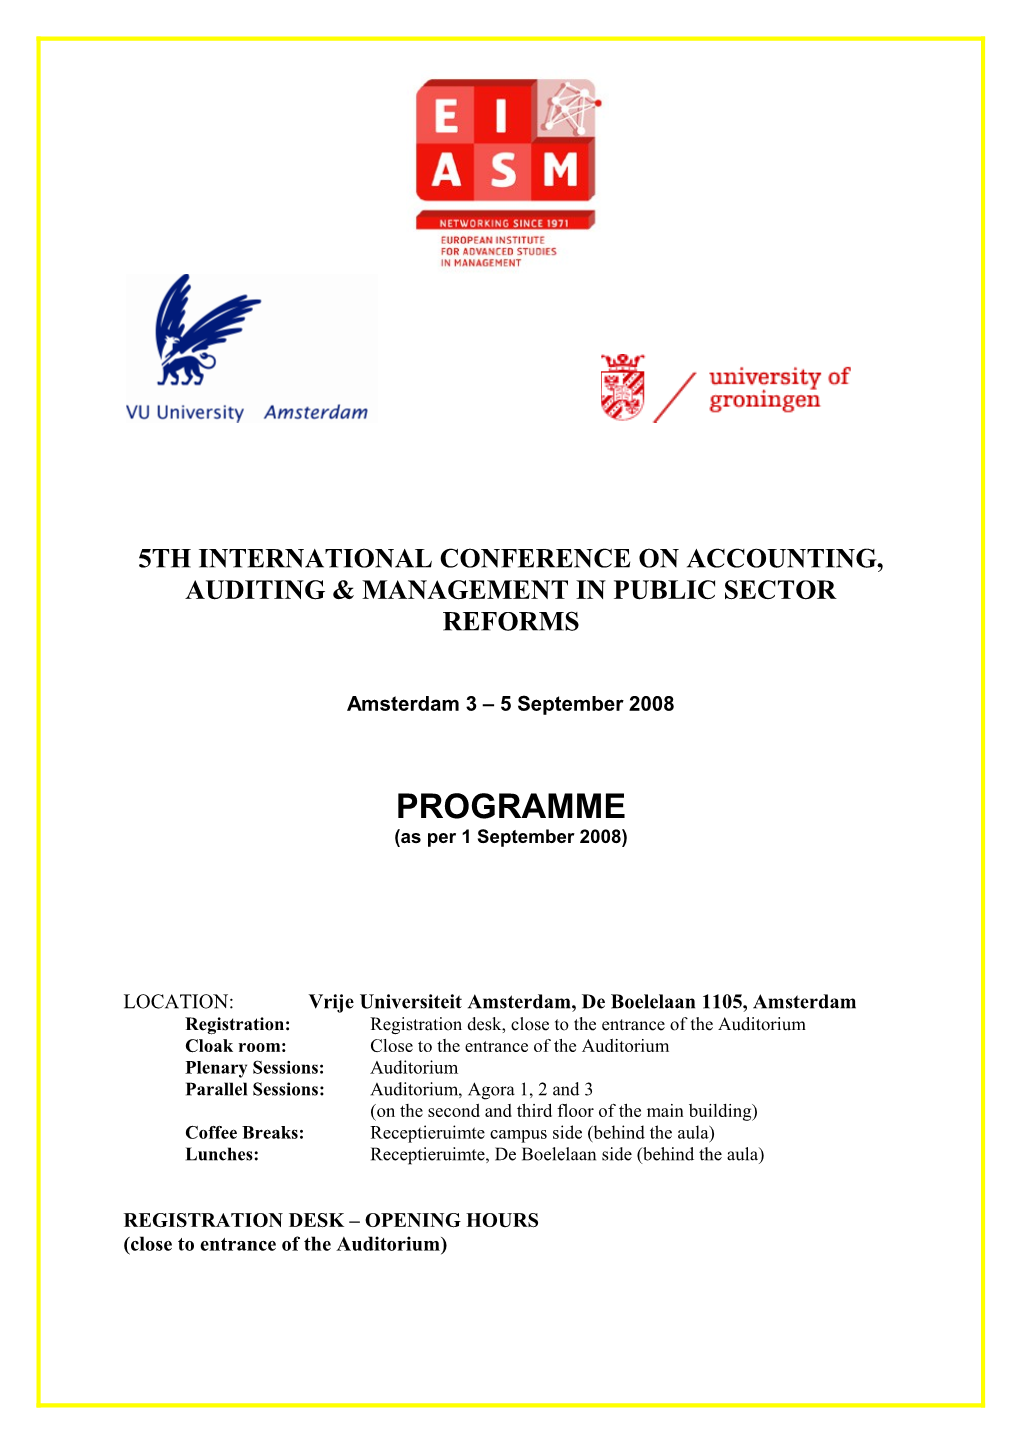 5Th International Conference on Accounting, Auditing & Management in Public Sector Reforms